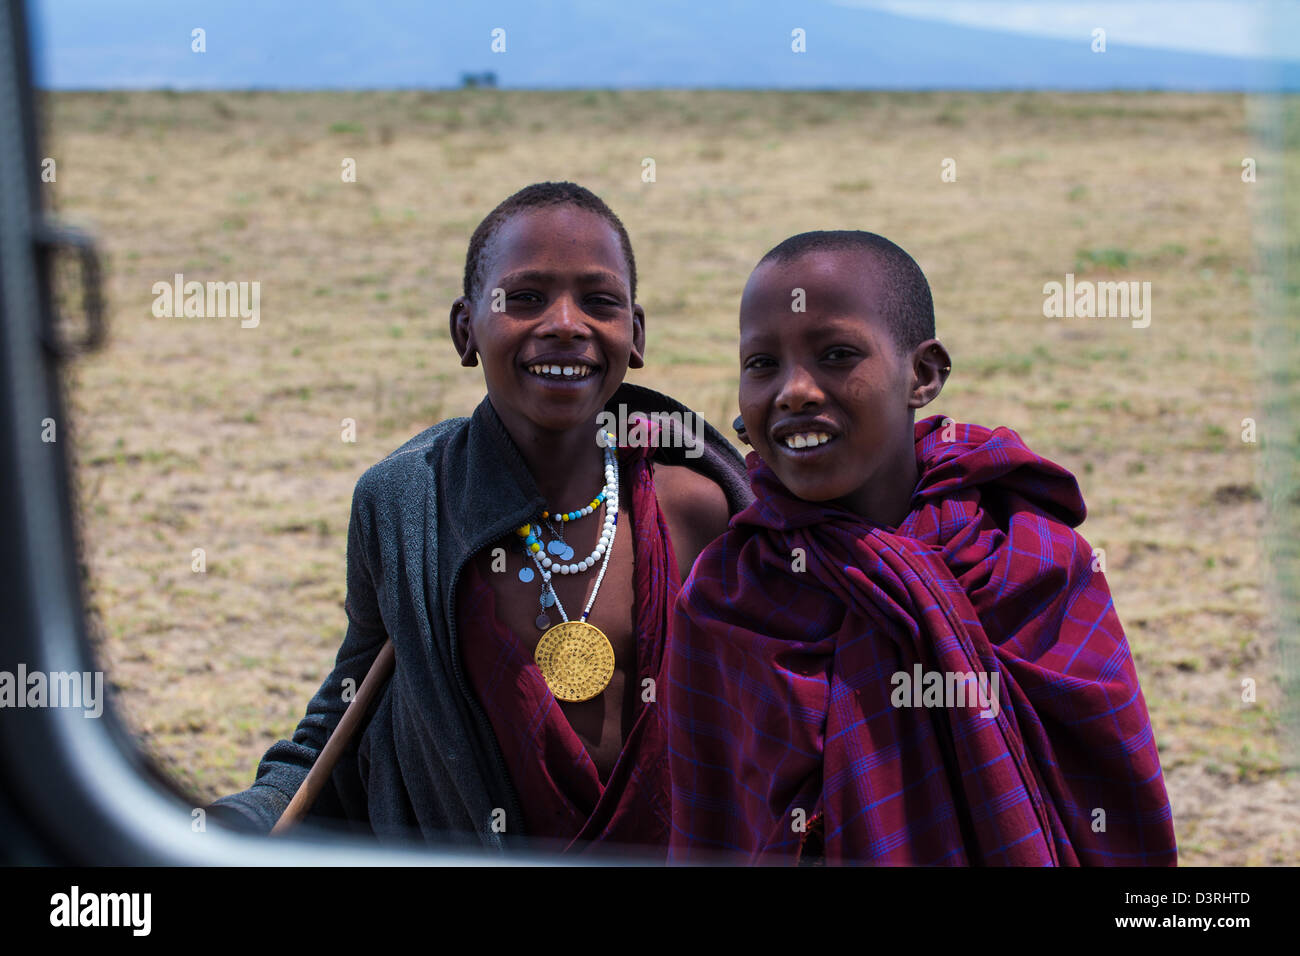 Masai children look into the safari jeep window as captivated by the tourist as they are of them. Tanzania Stock Photo